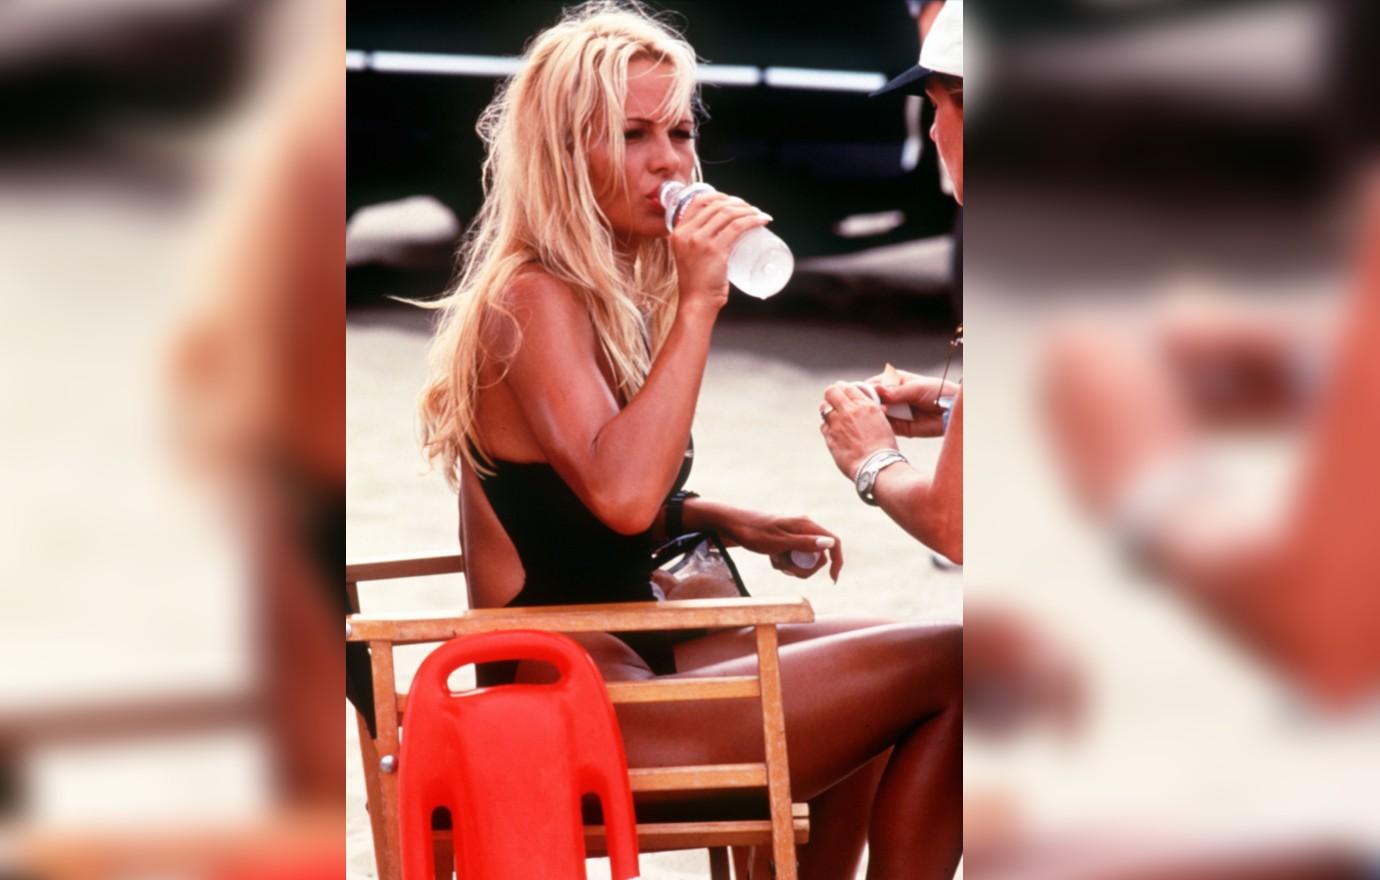 REVEALED: Secret Plot To Recast Pamela Anderson's 'Baywatch' Role With Gina  Lee Nolin